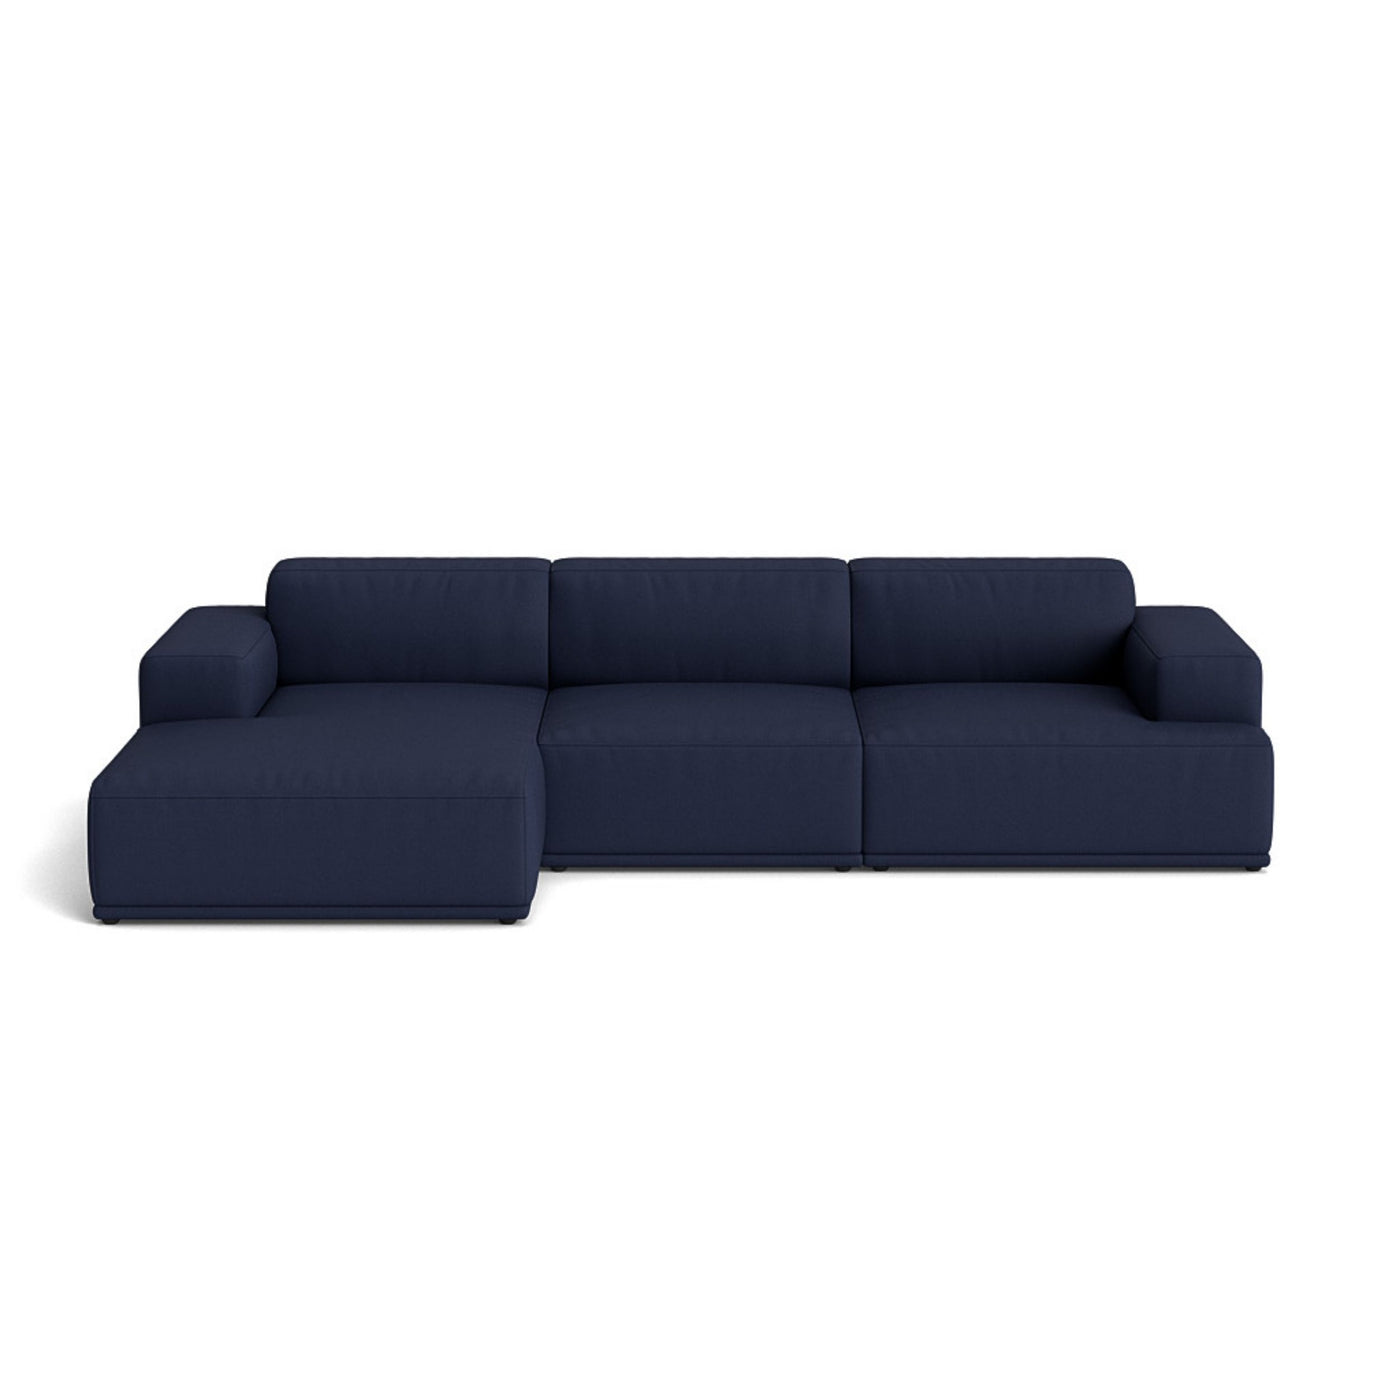 Muuto Connect Soft Modular 3 Seater Sofa, configuration 3. Made-to-order from someday designs. #colour_balder-792